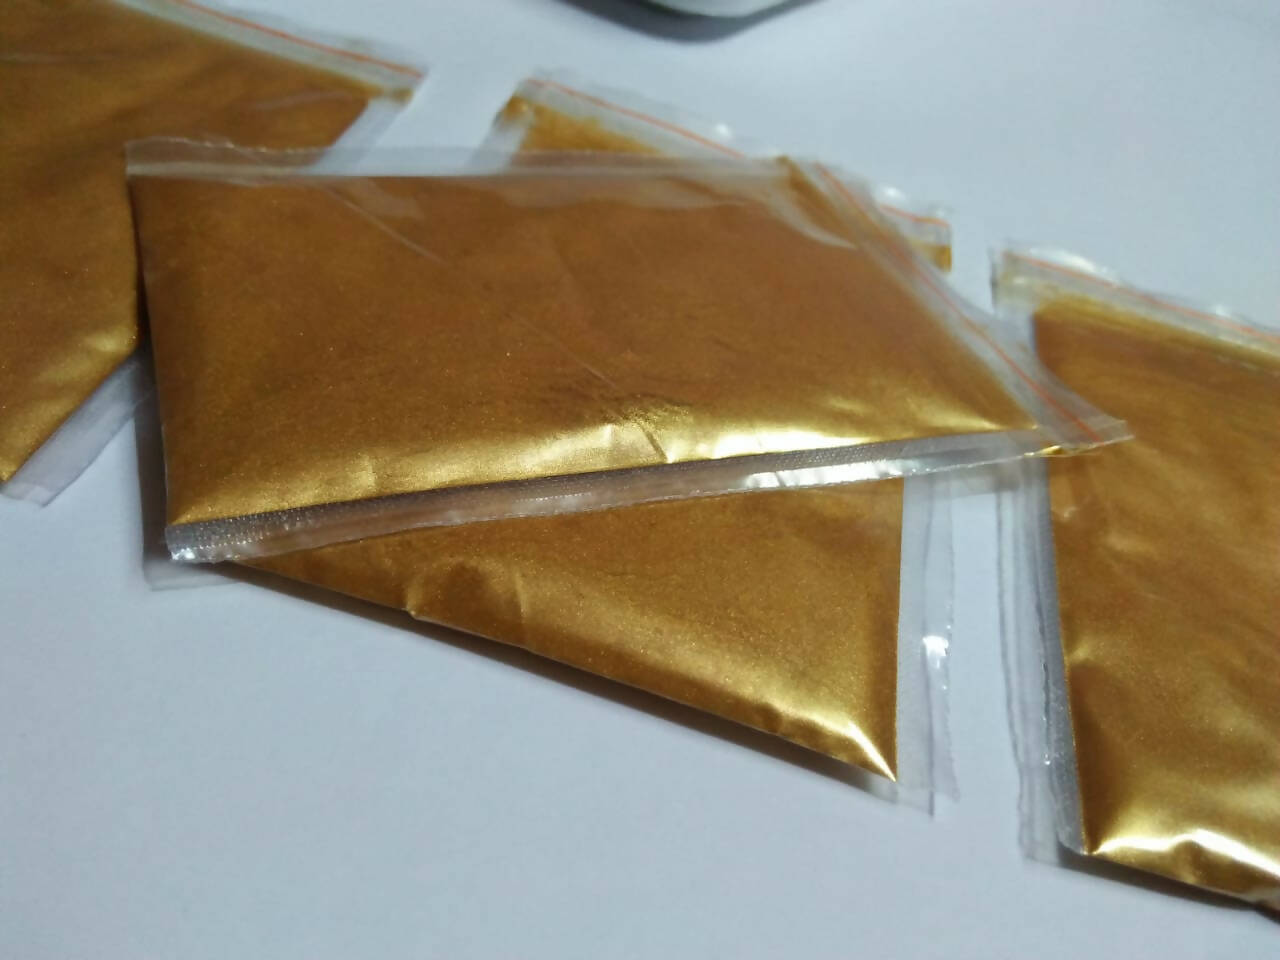 250g Mica Pearl Pigments Powder For Epoxy Resin and Crafts - Golden, Red, White, Blue, Purple